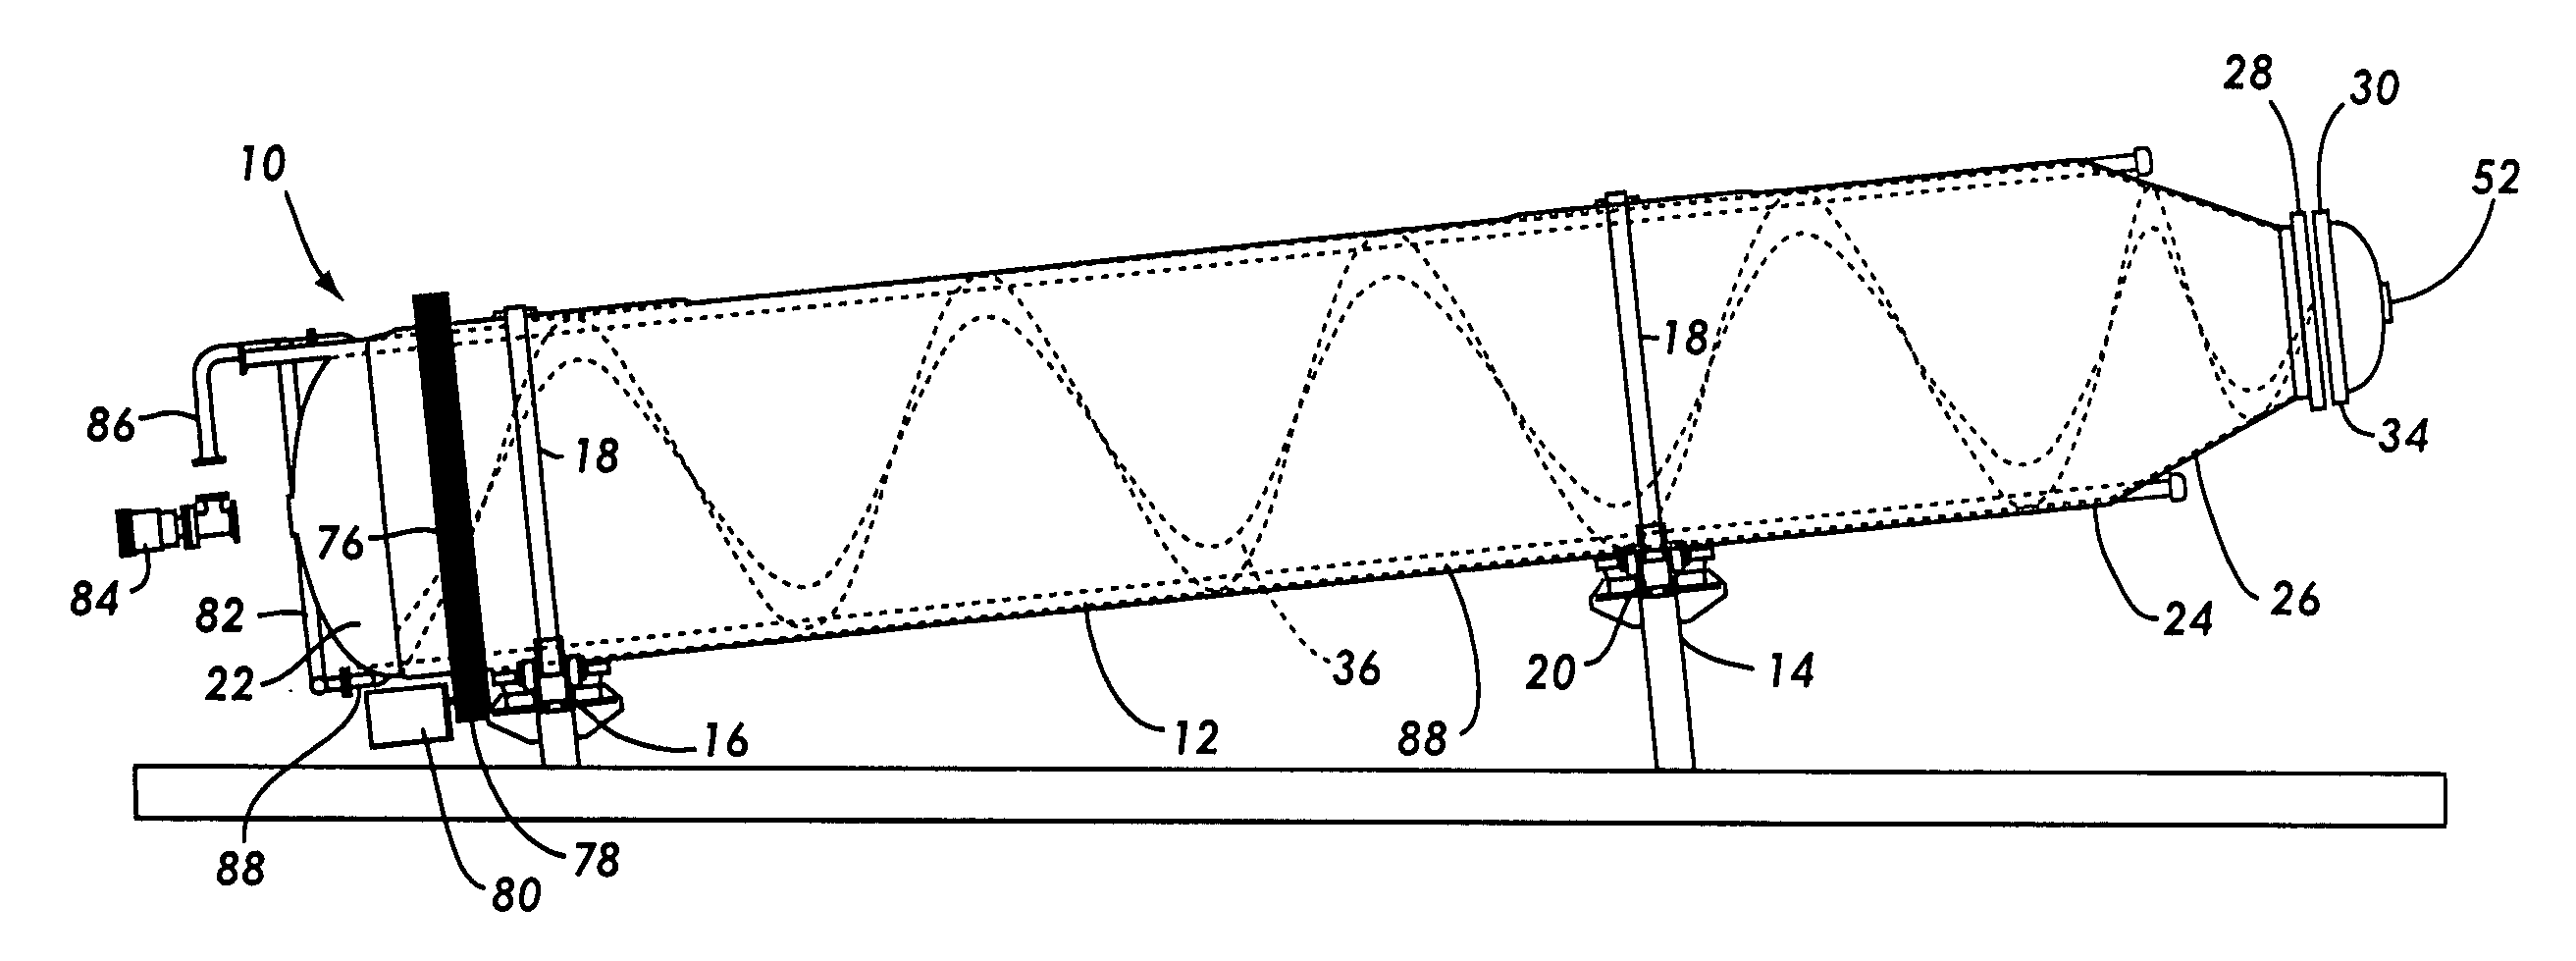 Angled reaction vessel